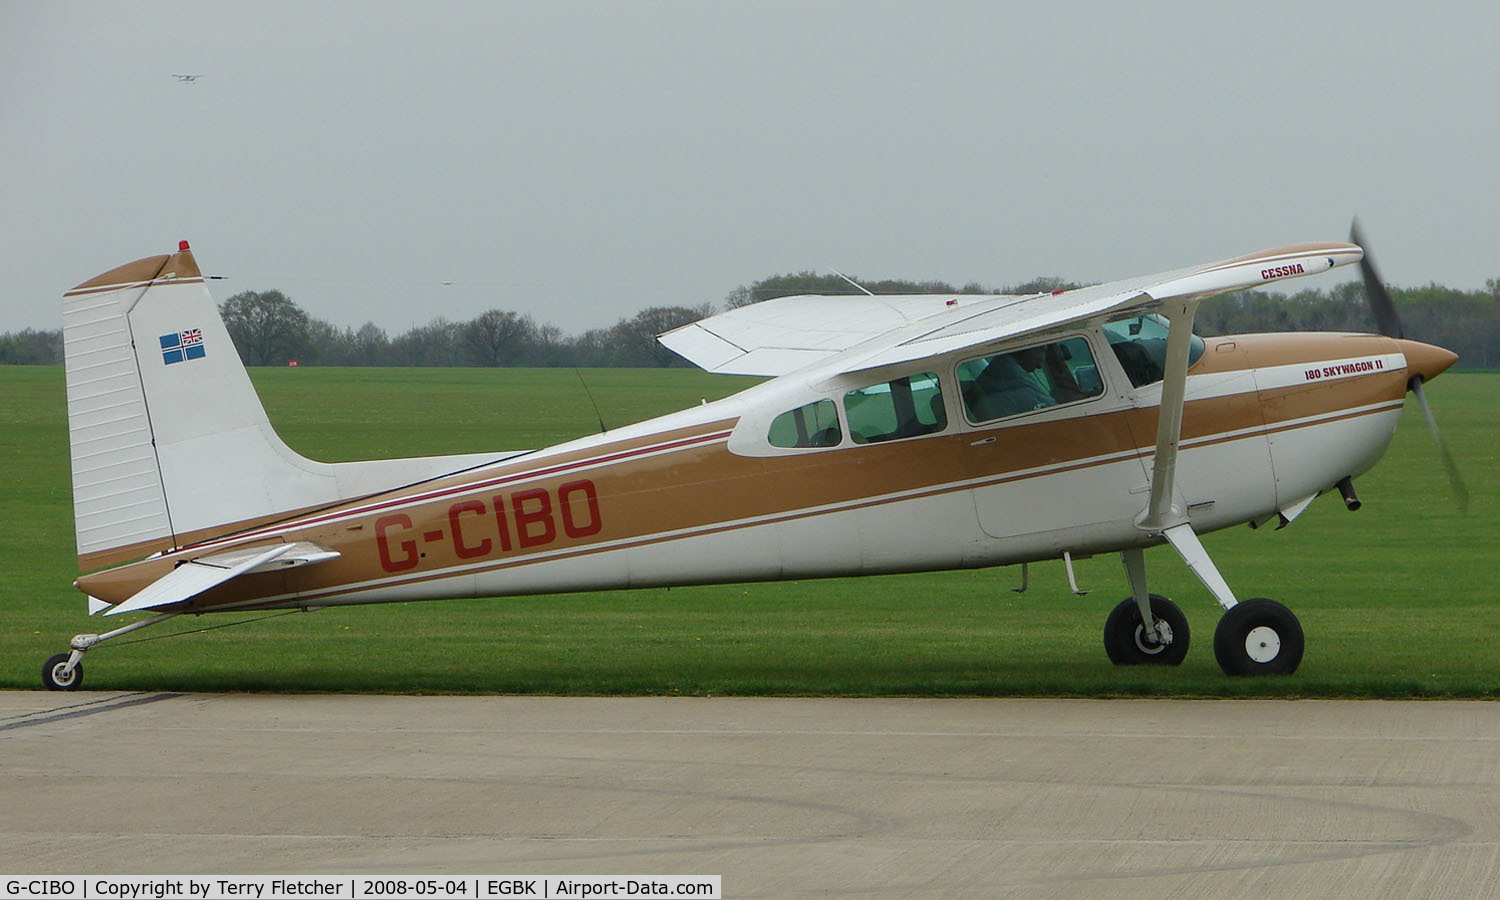 G-CIBO, 1981 Cessna 180K Skywagon C/N 18053177, Visitor to the Sywell GA scene on Tiger Moth Fly-in Day in May 2008